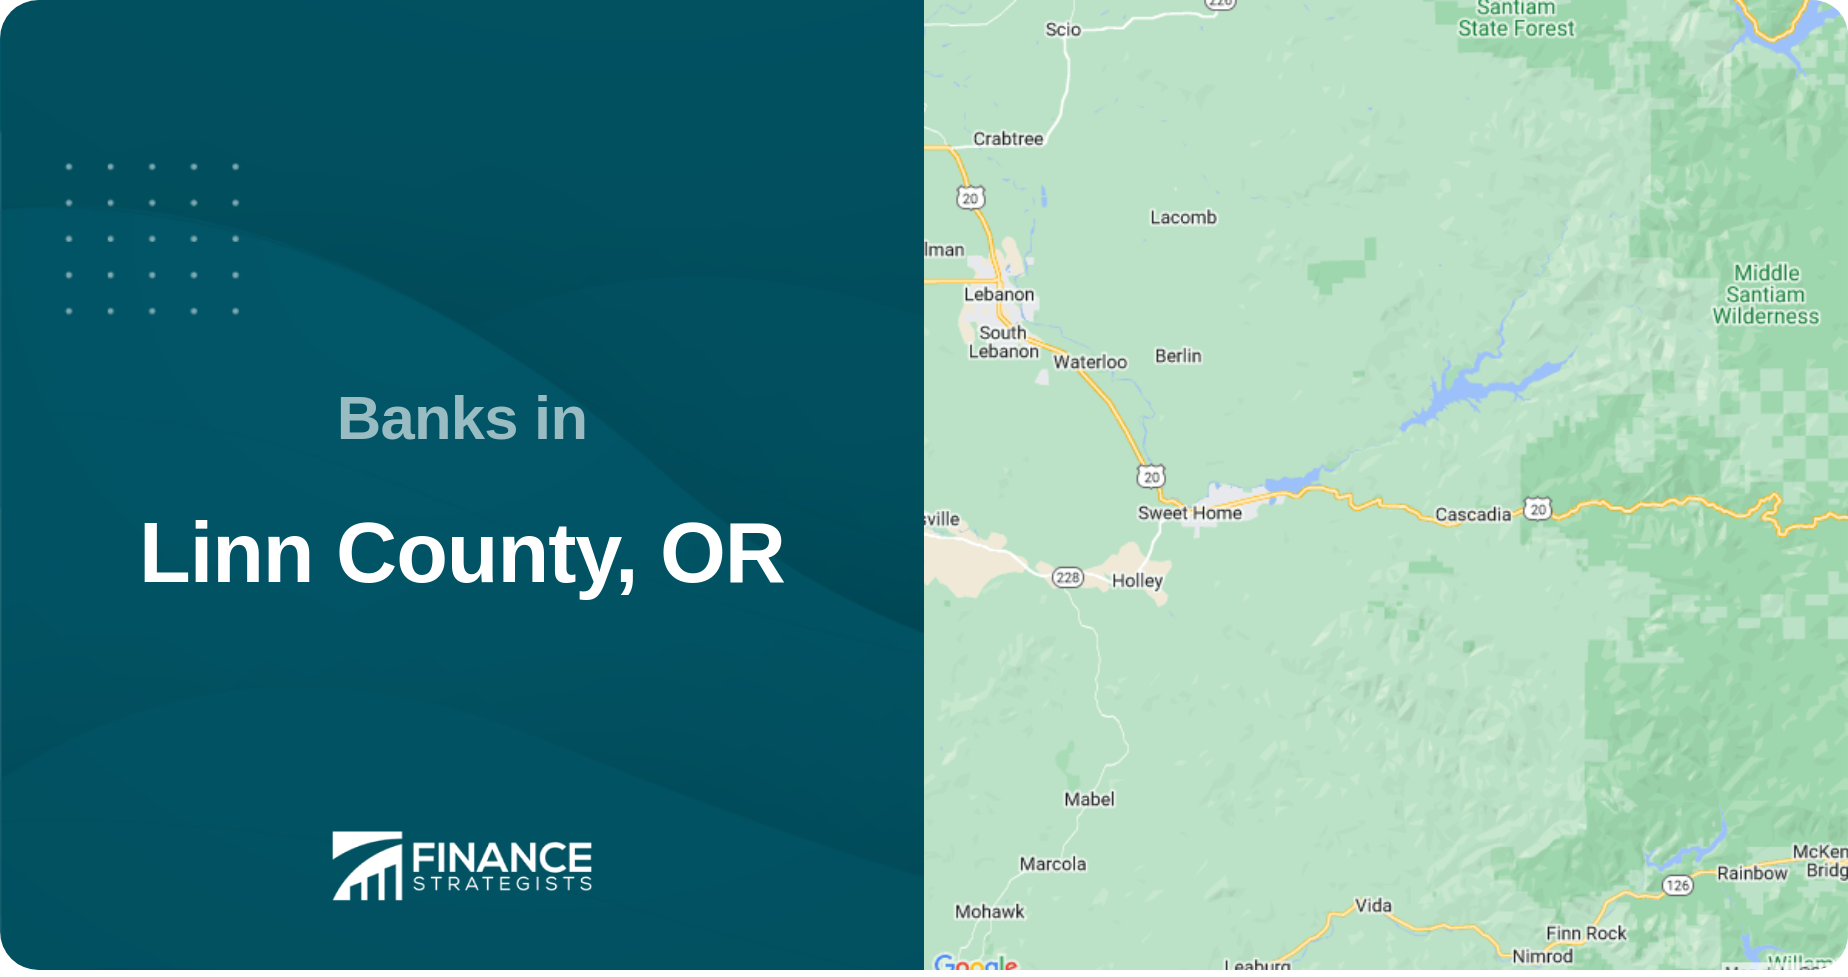 Banks in Linn County, OR